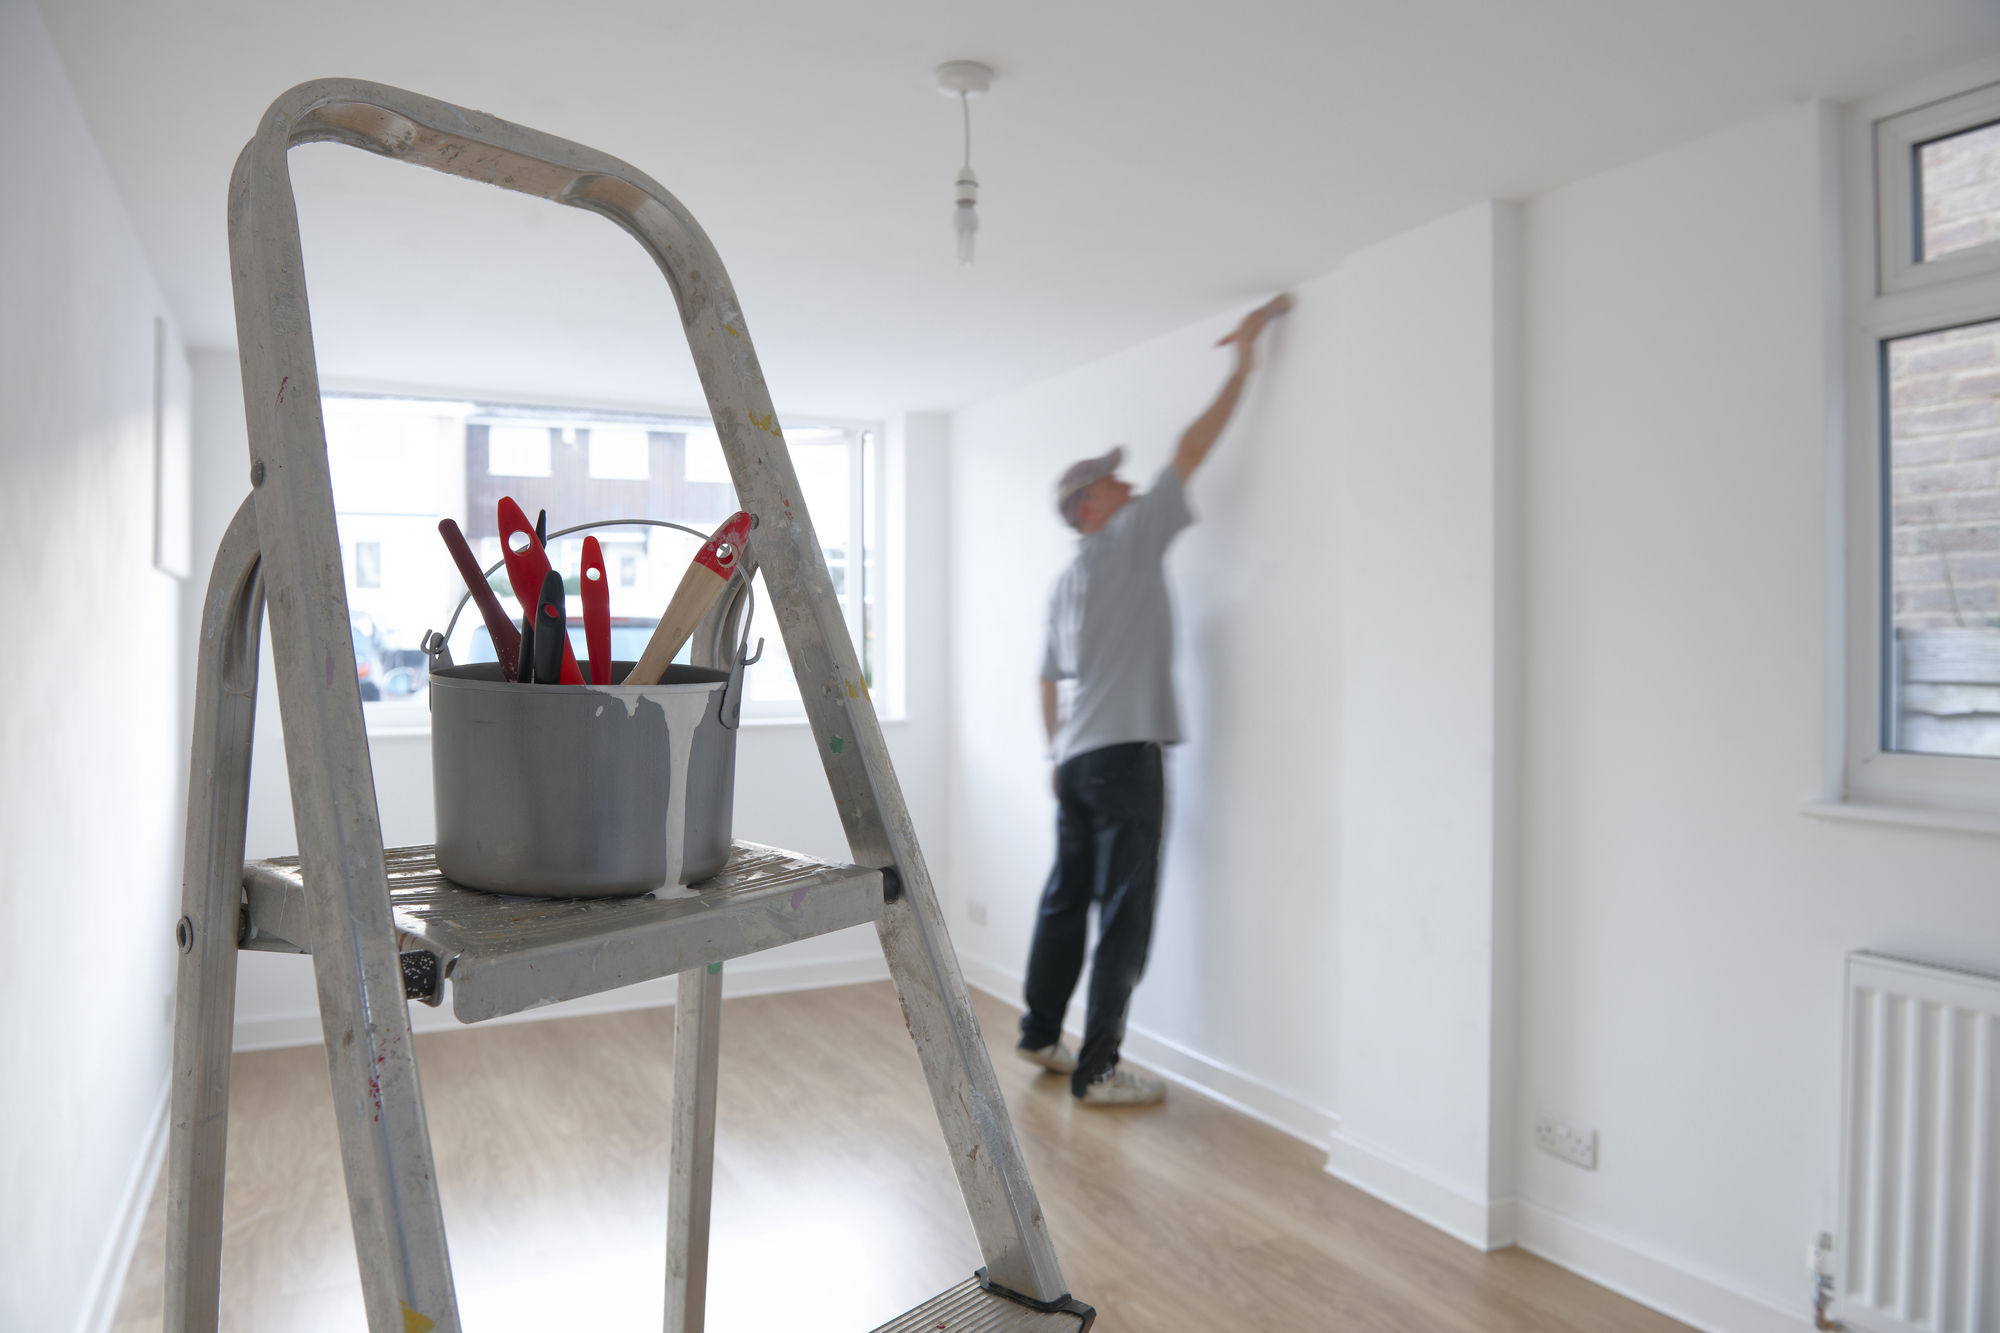 Man decorating a room with ladder and paint pot in foreground